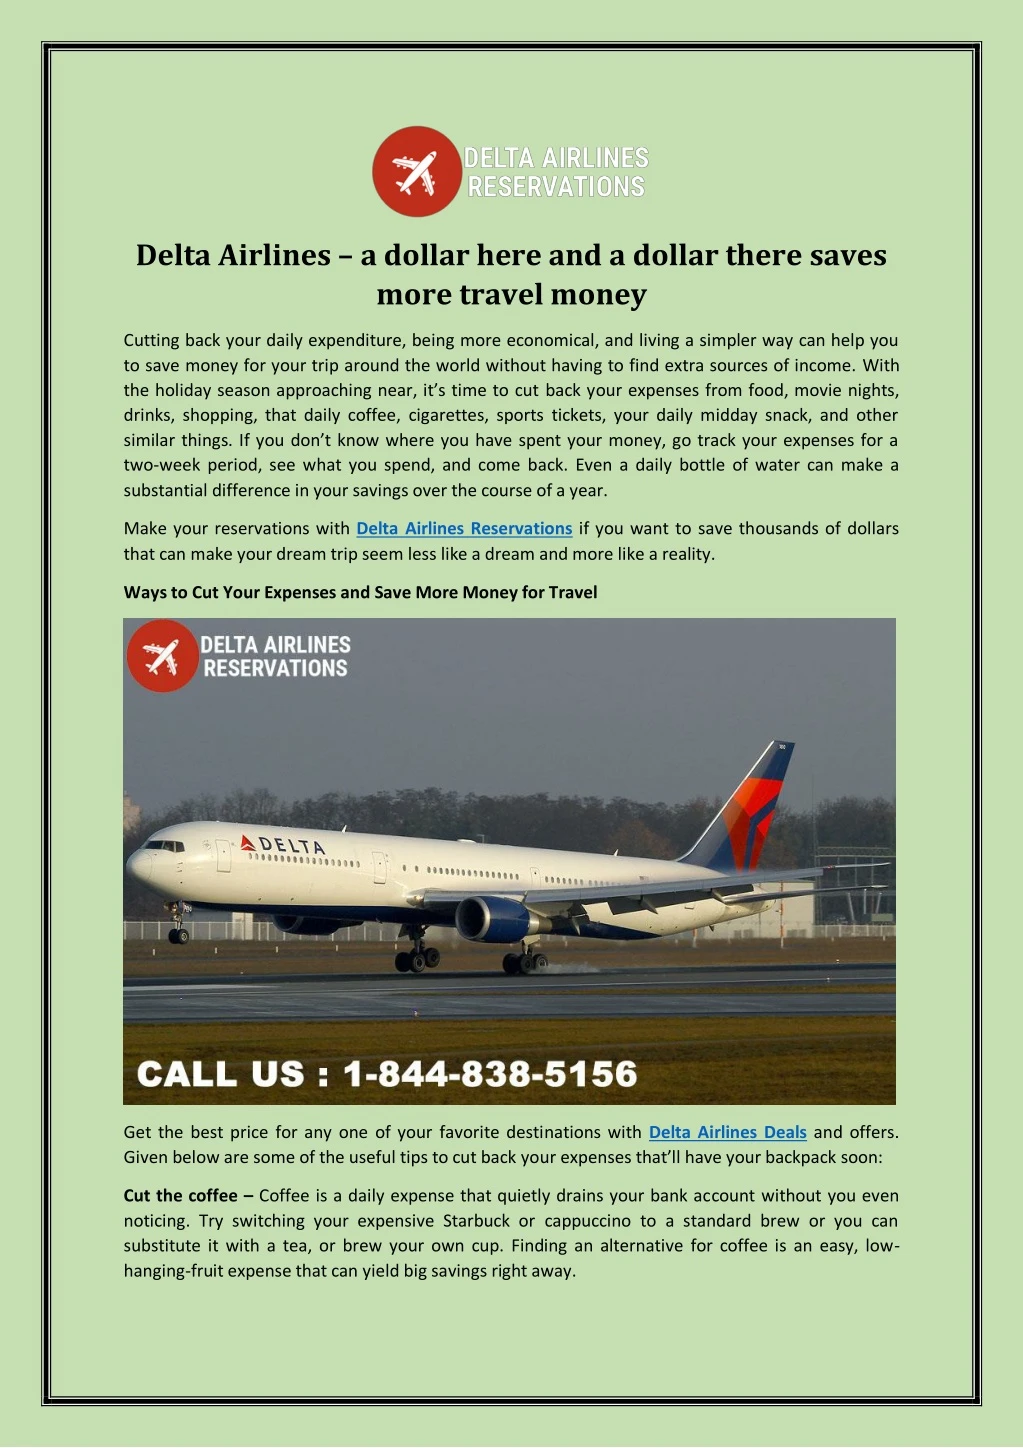 delta airlines a dollar here and a dollar there